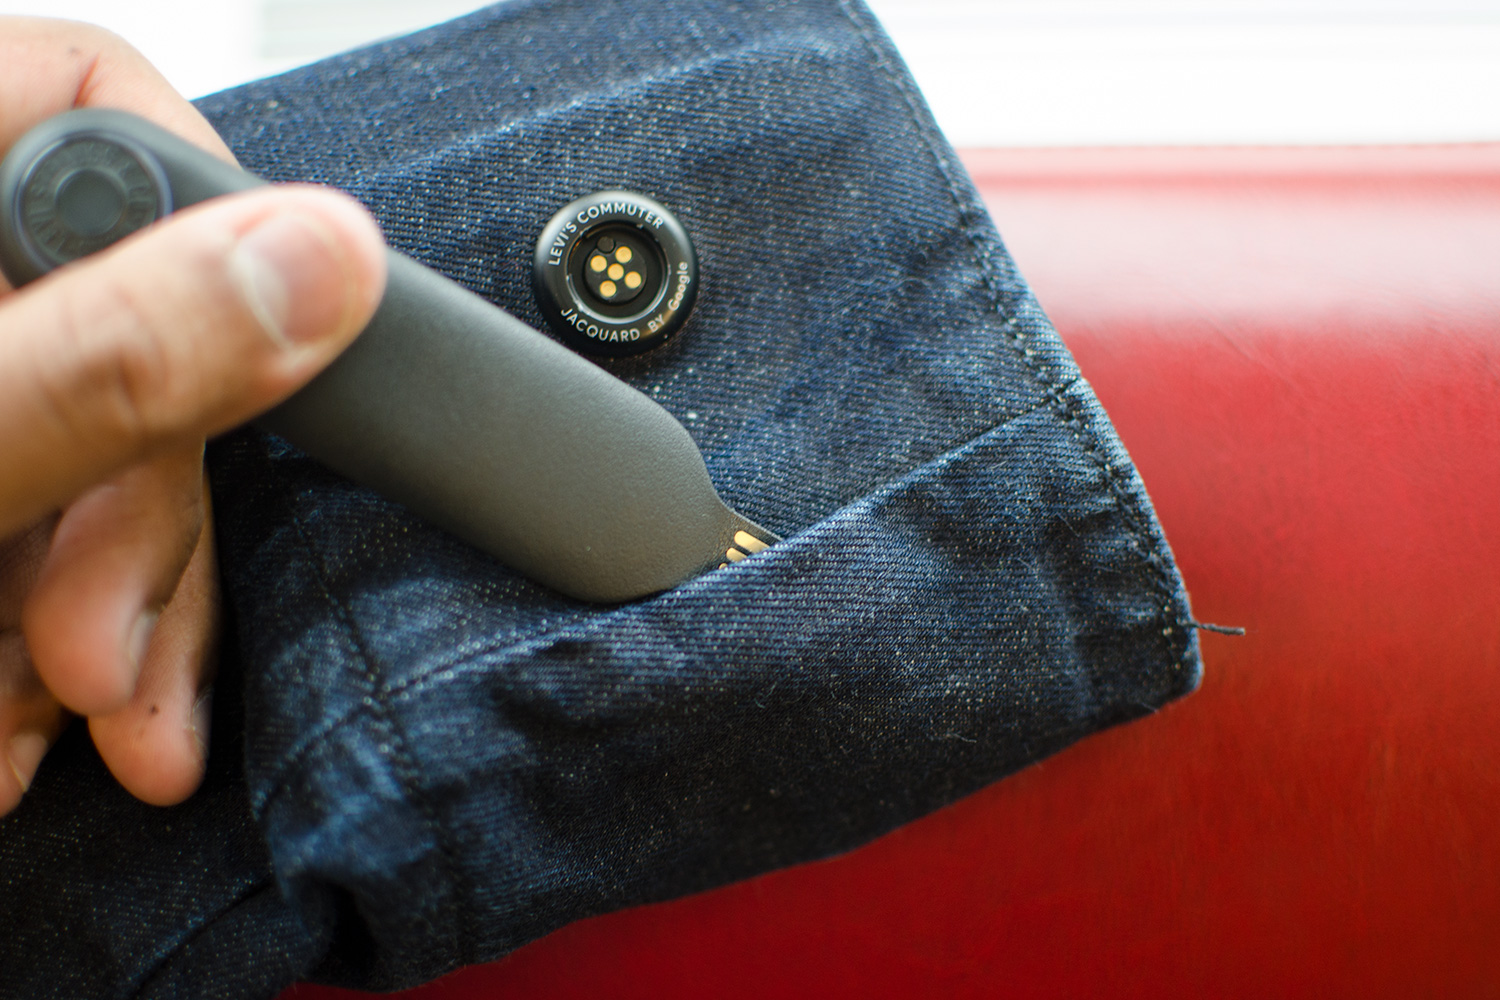 Levi's and Google's New Denim Jackets Can Answer Calls, Control Music